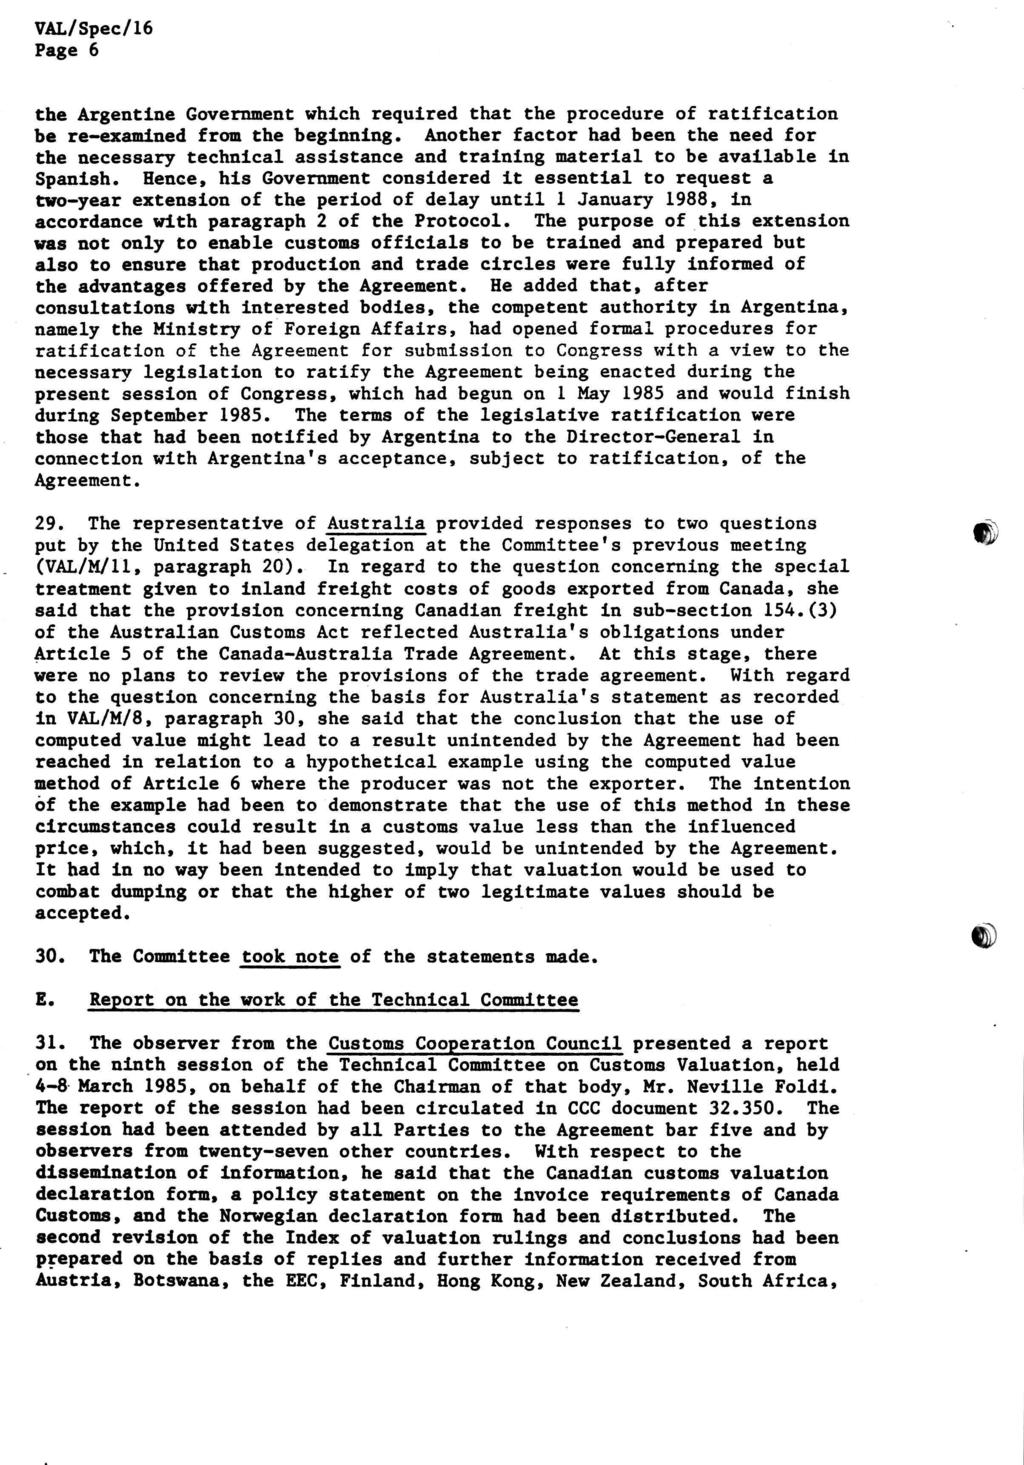 Page 6 the Argentine Government which required that the procedure of ratification be re-examined from the beginning.